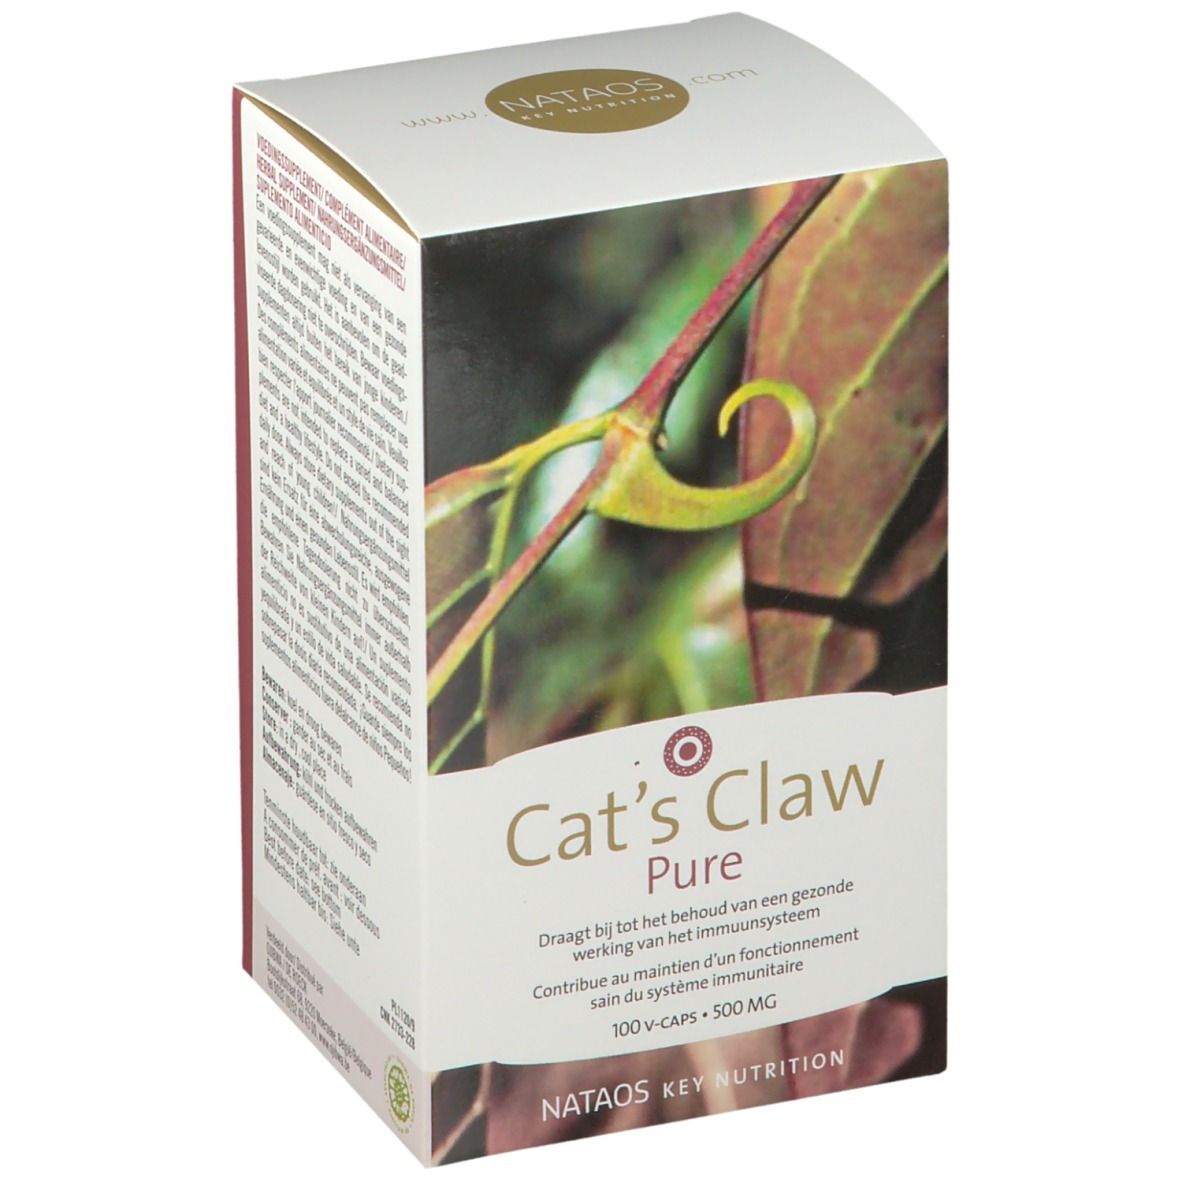 Nataos Key Nutrition Cat's Claw/Griffe de chat